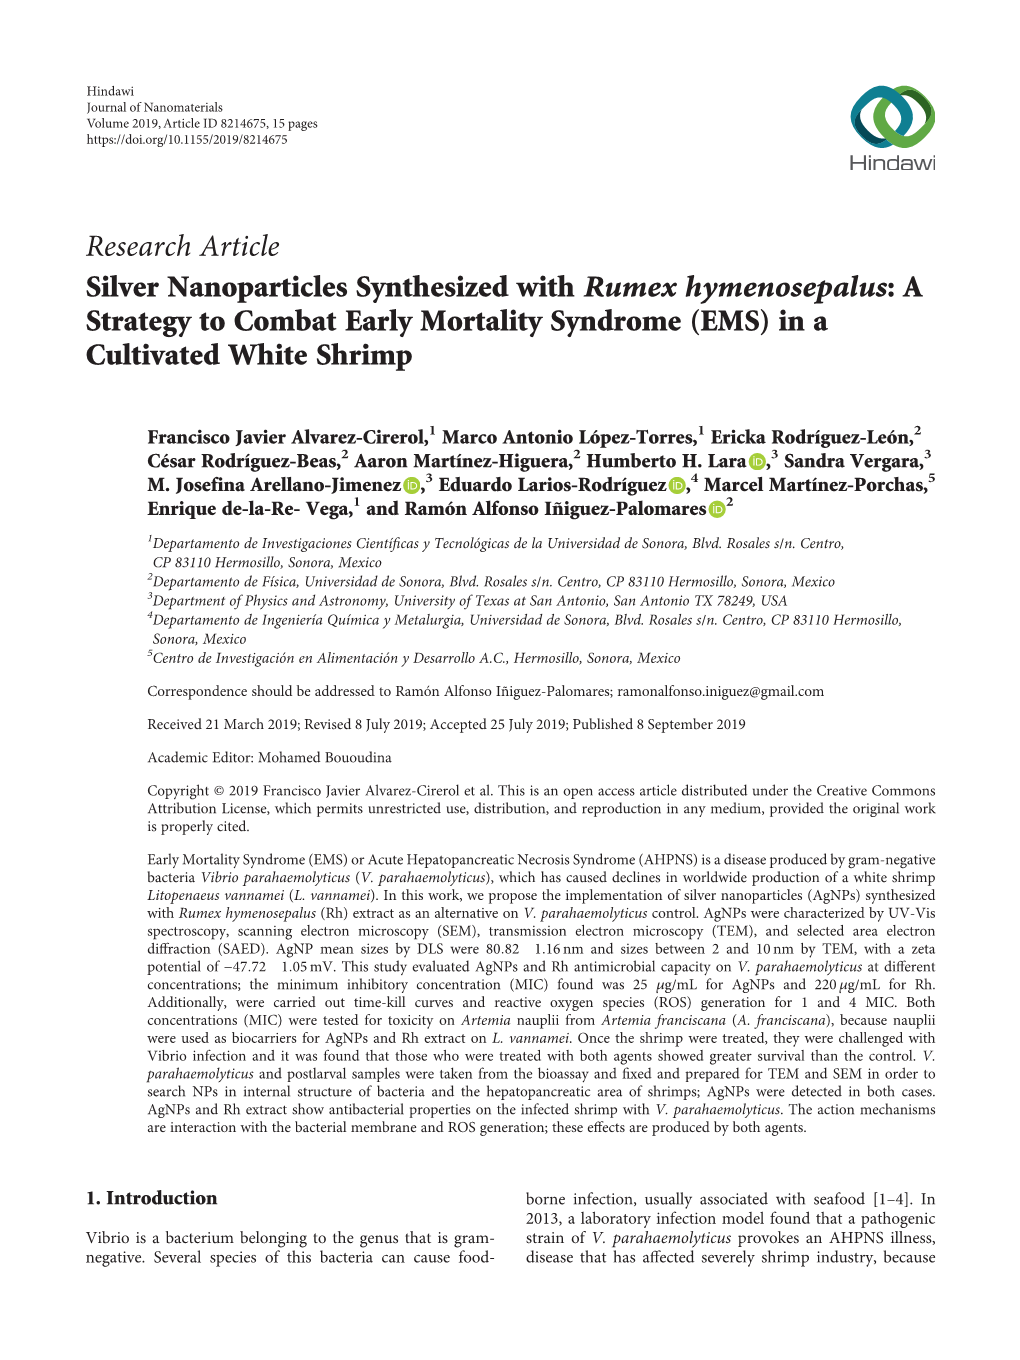 Research Article Silver Nanoparticles Synthesized with Rumex Hymenosepalus:A Strategy to Combat Early Mortality Syndrome (EMS) in a Cultivated White Shrimp